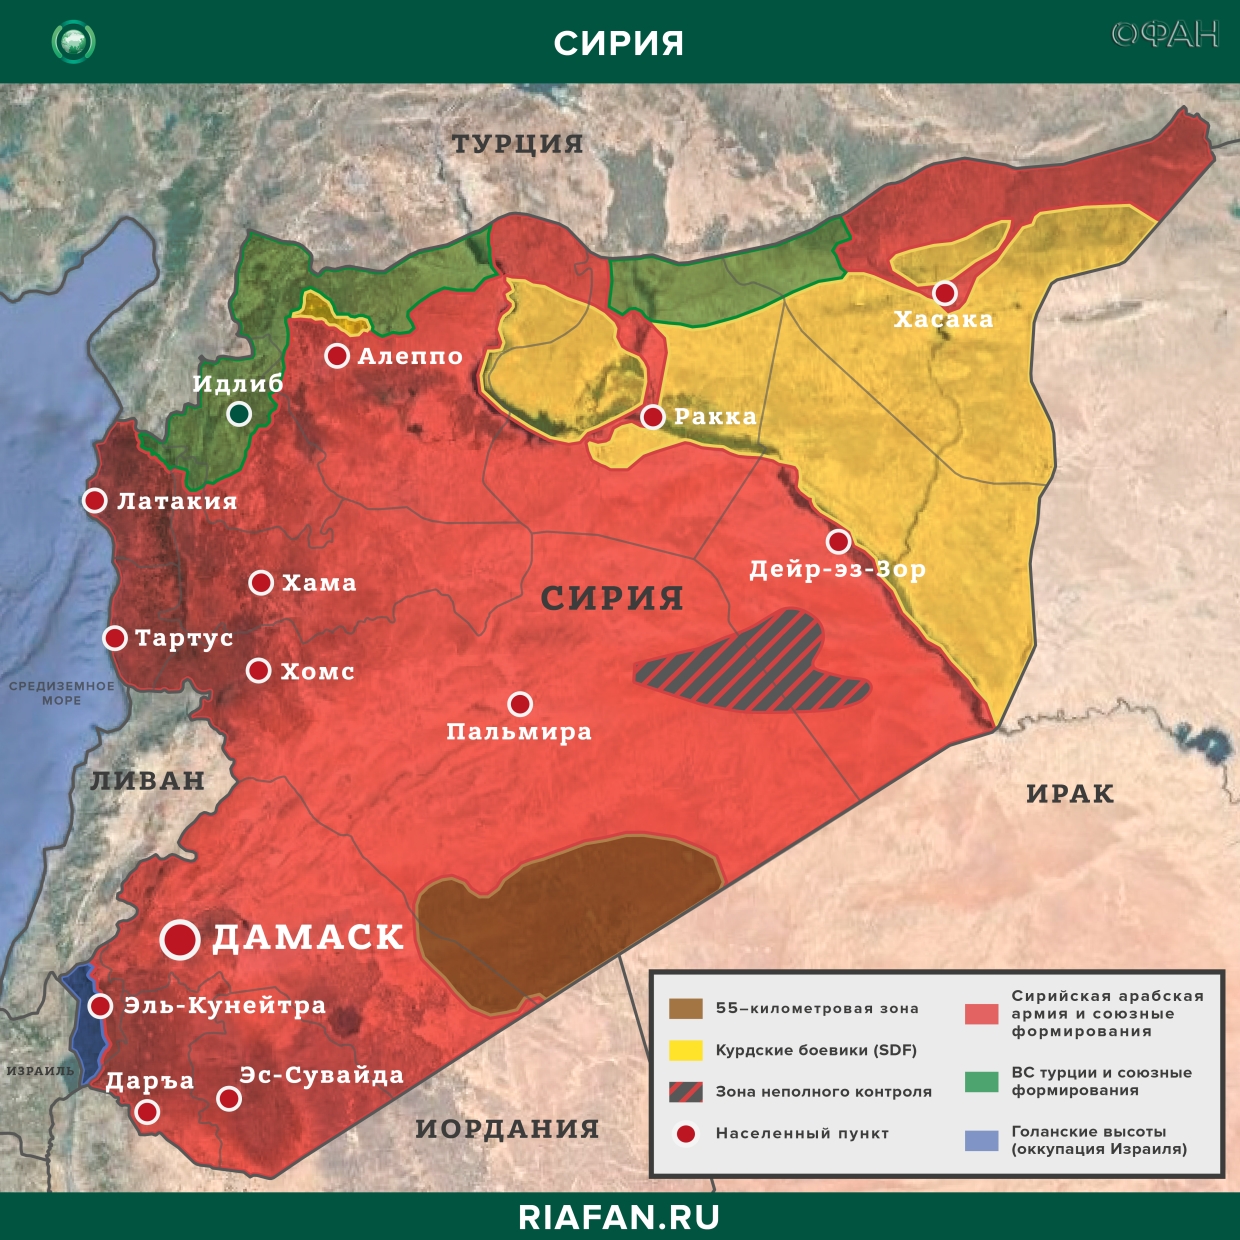 Syria news 1 Martha 07.00: CAA has deployed reinforcements to Idlib, The United States is amassing equipment to oil-rich areas of the Syrian Arab Republic